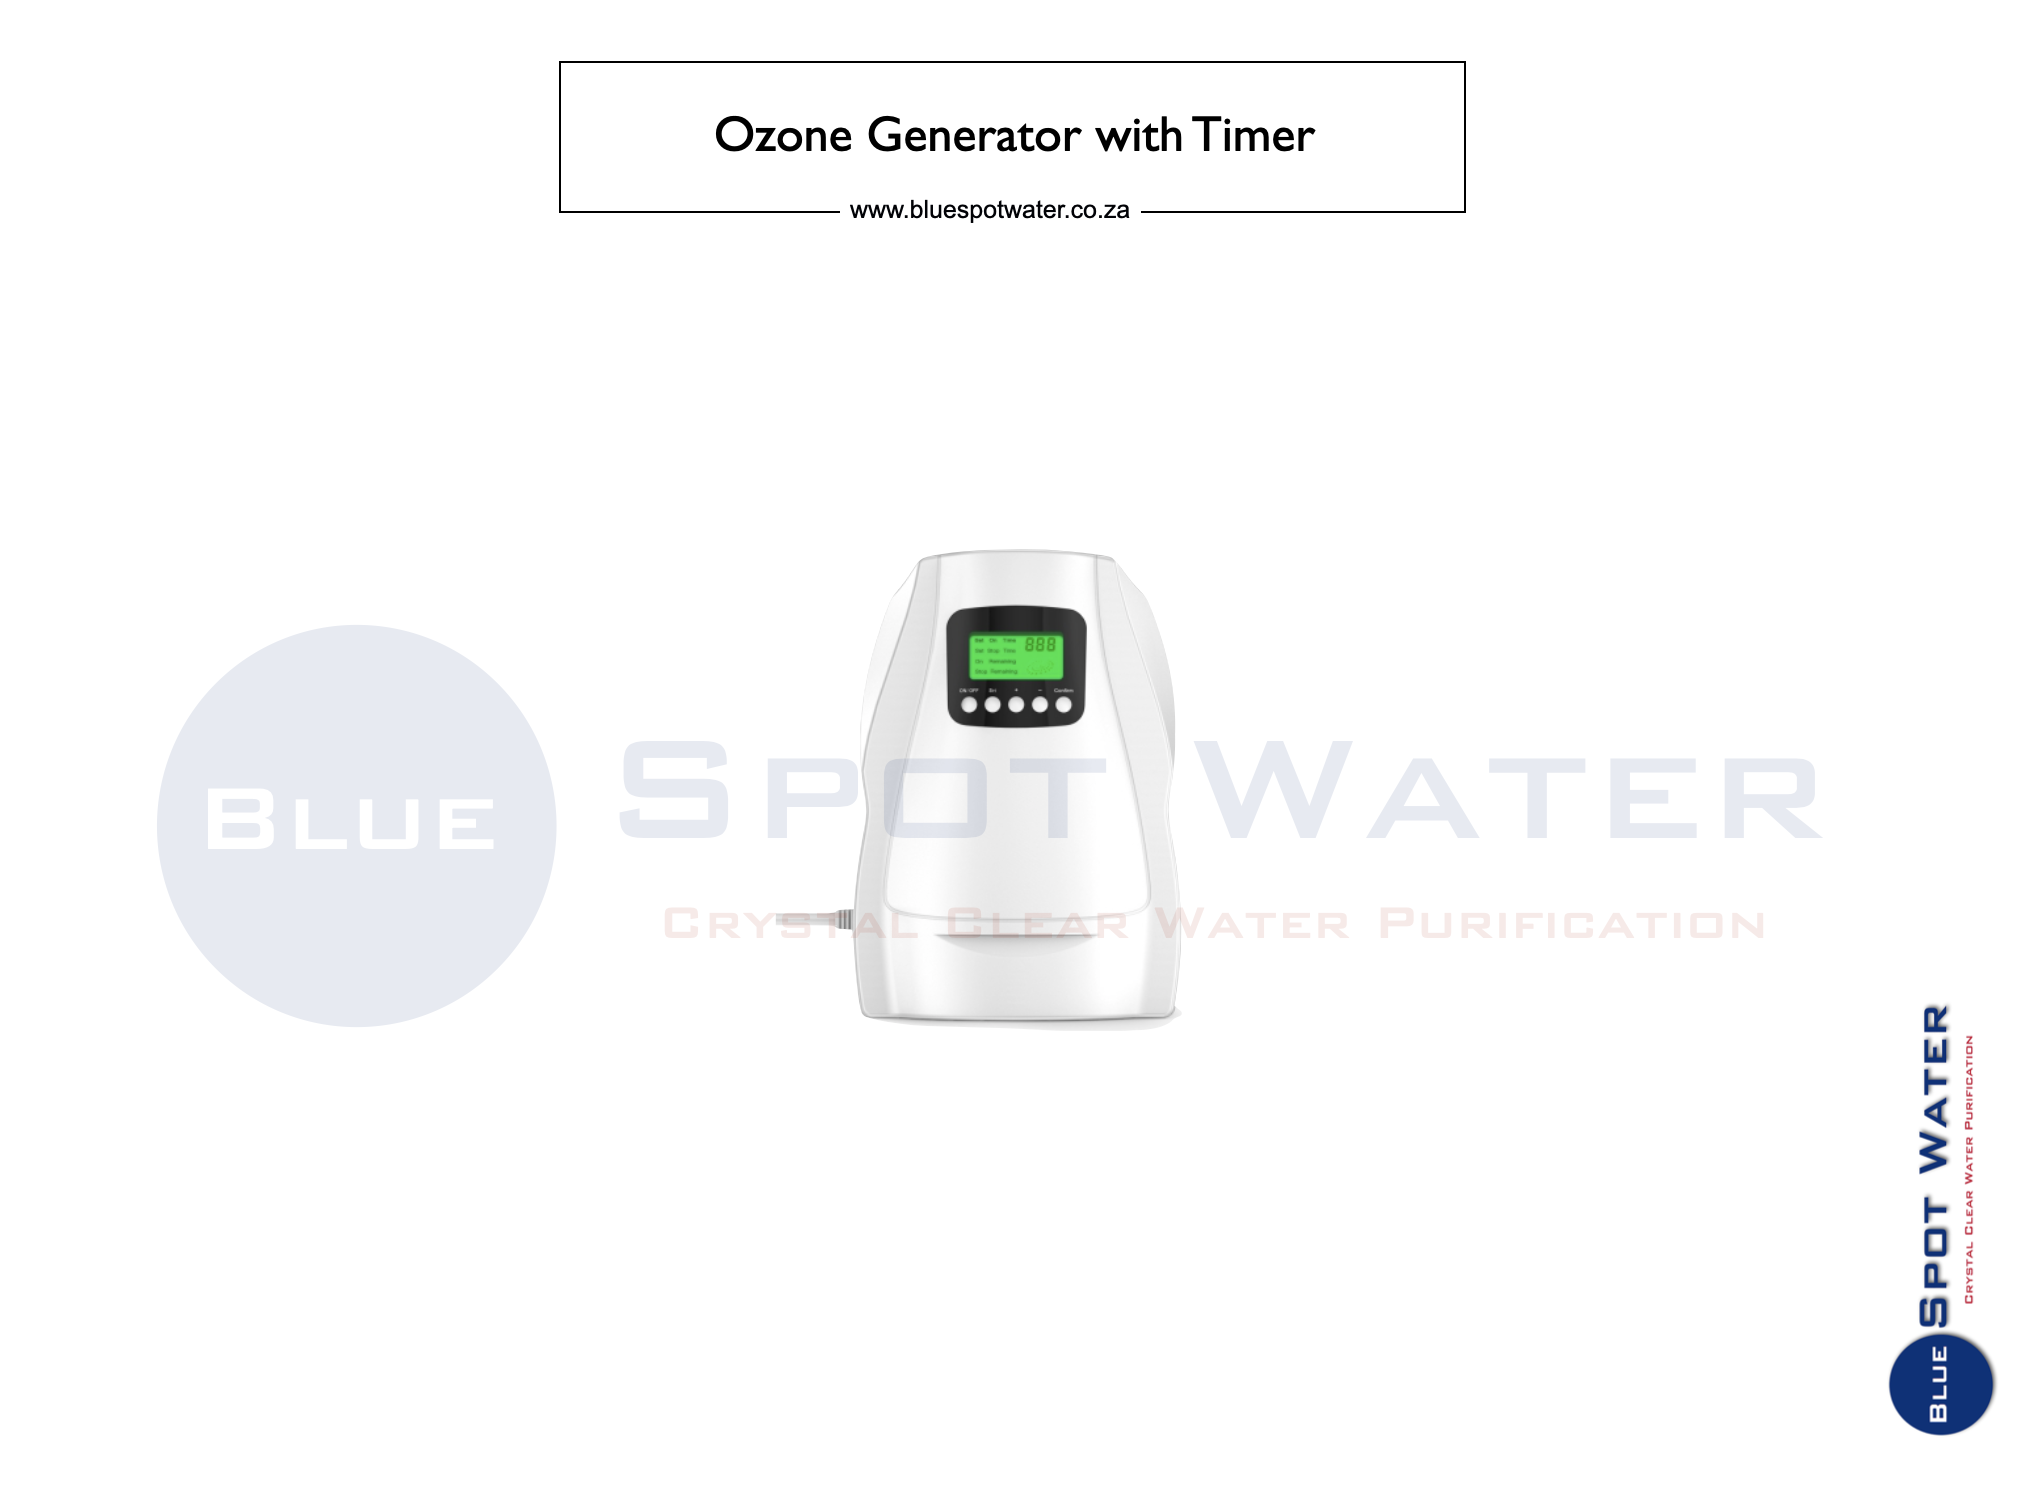 ozone-generator-with-timer